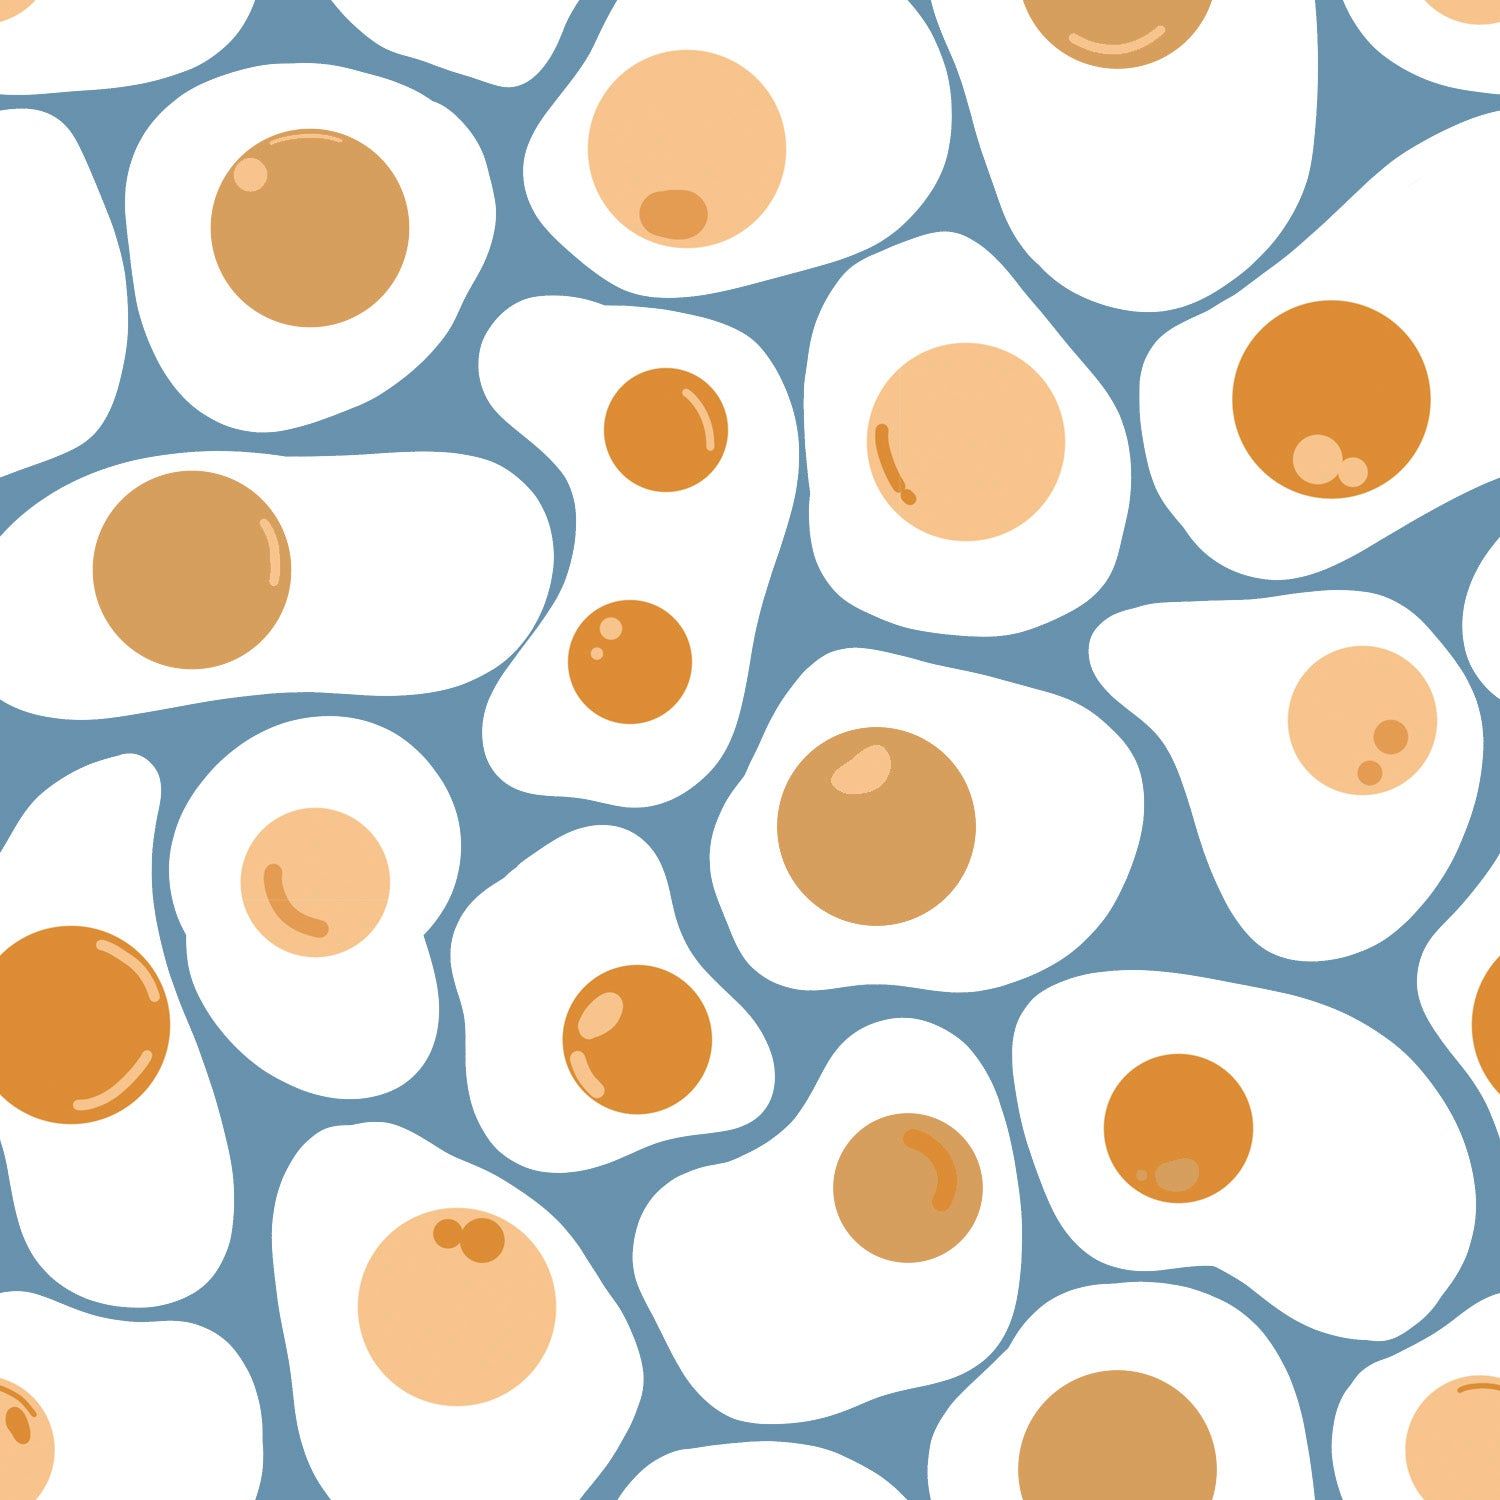 A pattern of white and brown fried eggs on a blue background - Egg